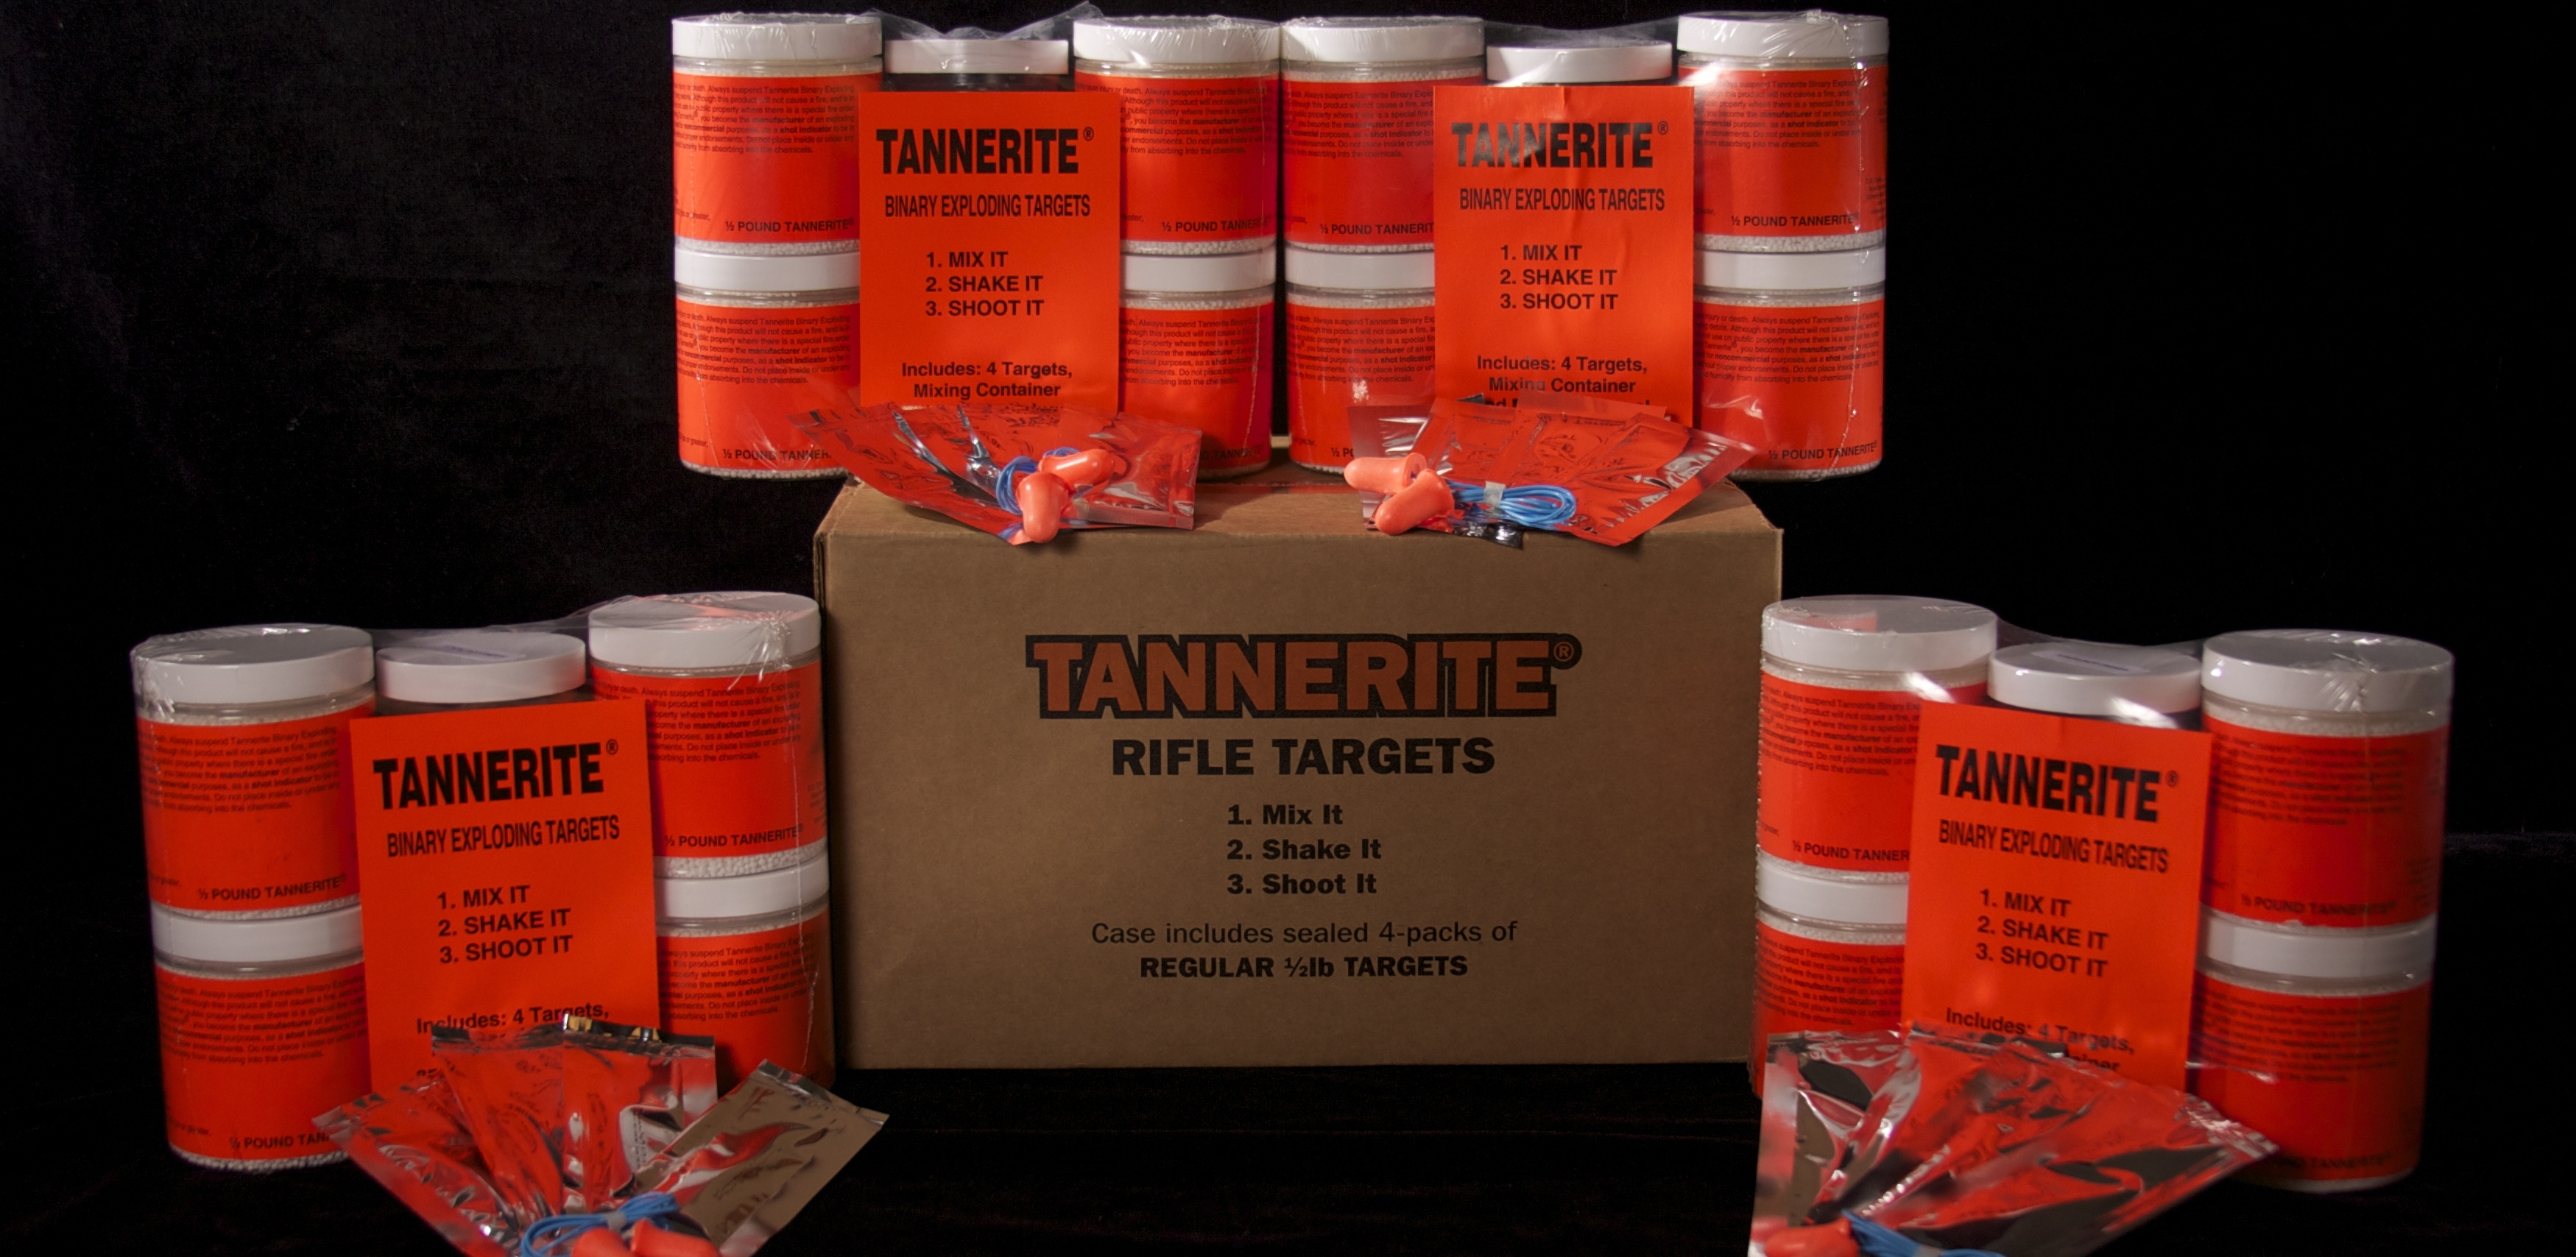 Law Enforcement to Crack Down on Tannerite Use